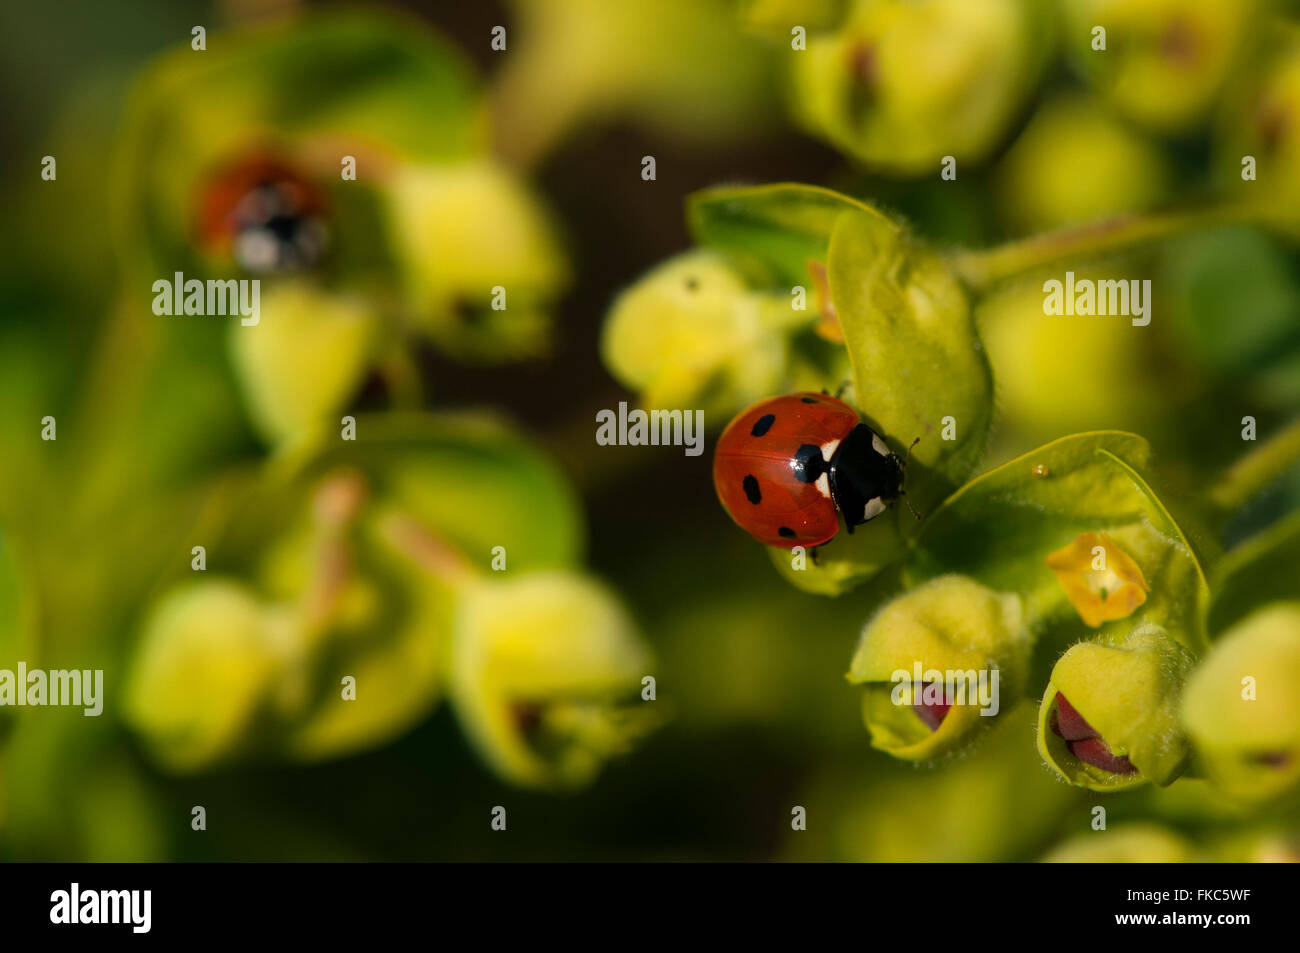 Closeup image of two Ladybirds/bugs shown on a flowering shrub. Stock Photo